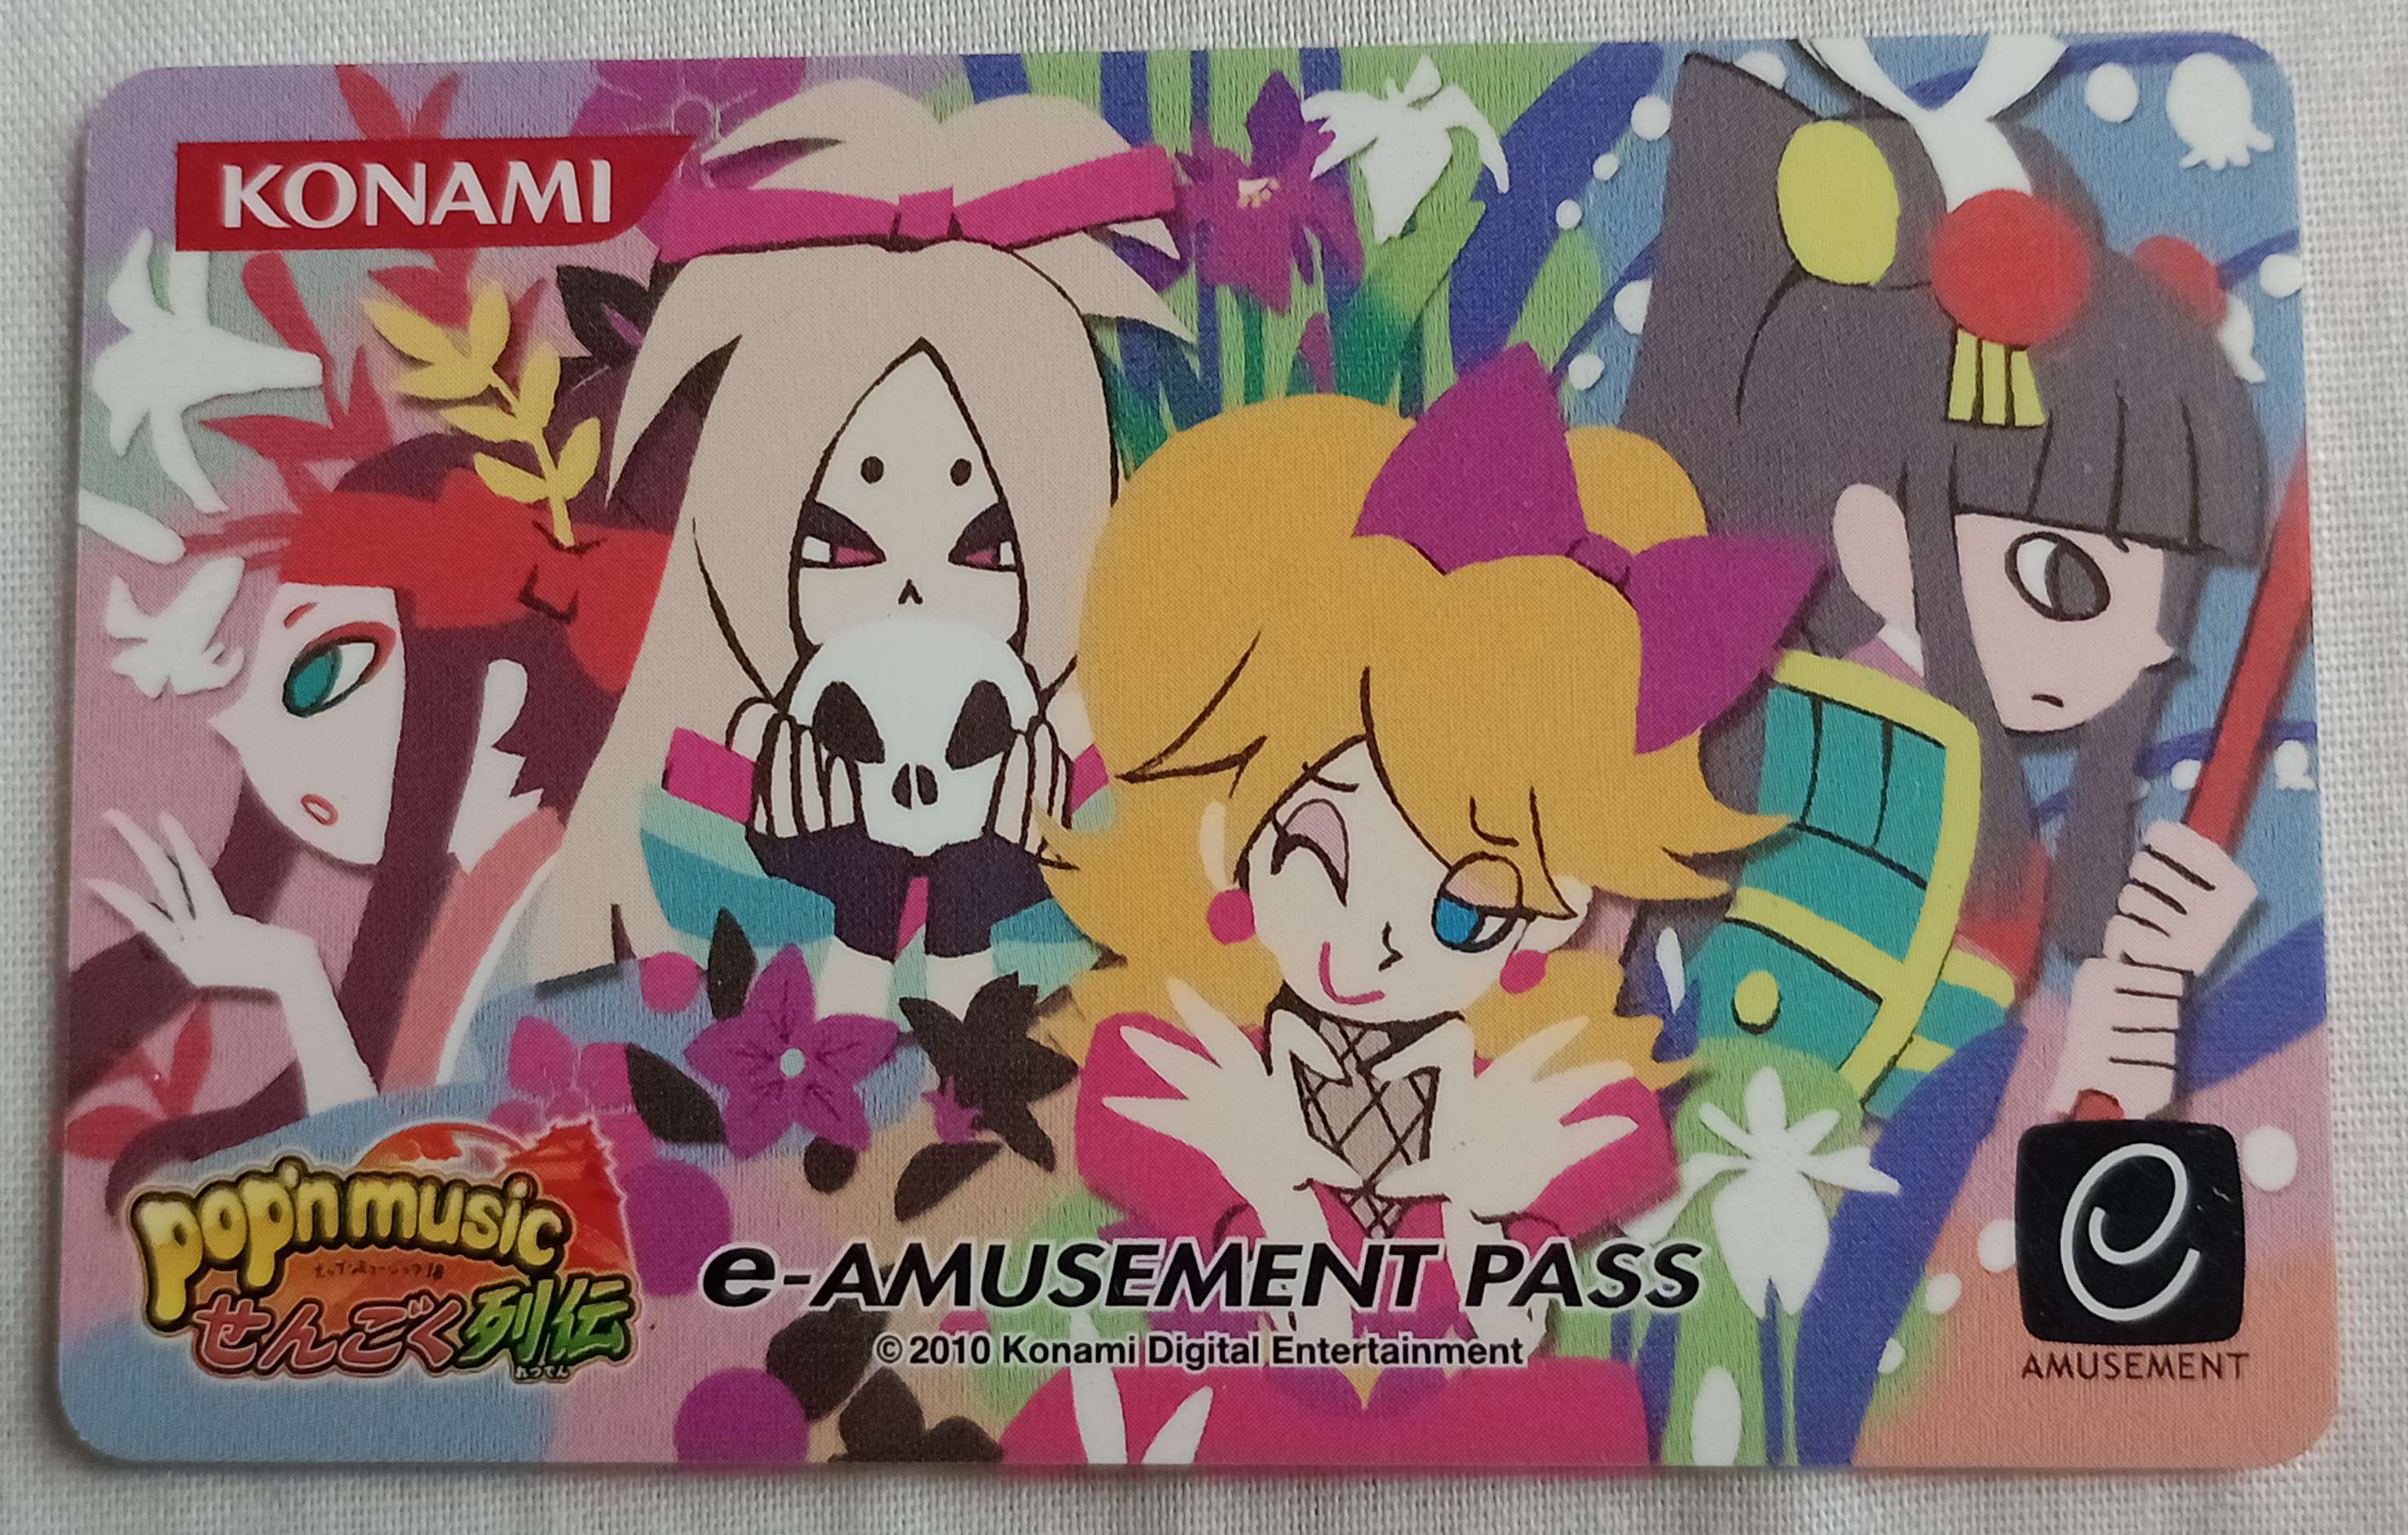 TROUT's e-amusement card. It has a design of four pop'n music characters on it.